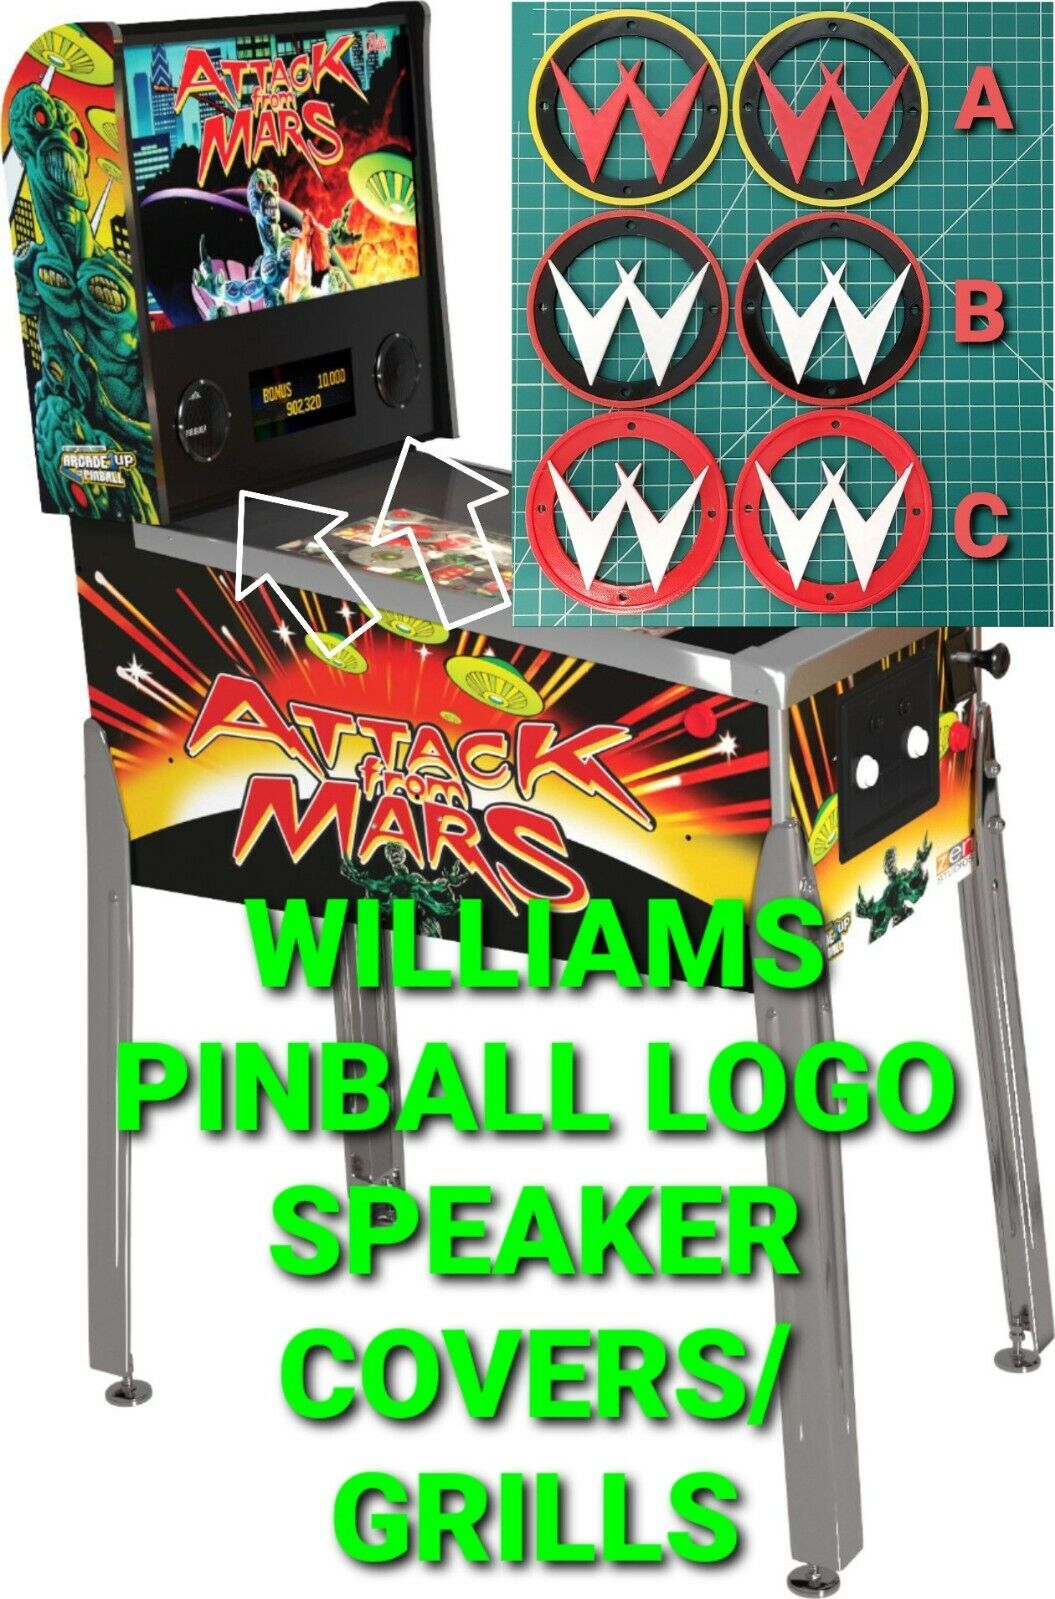 Arcade1up Attack From Mars Williams Pinball Custom Speakers Grills/Covers